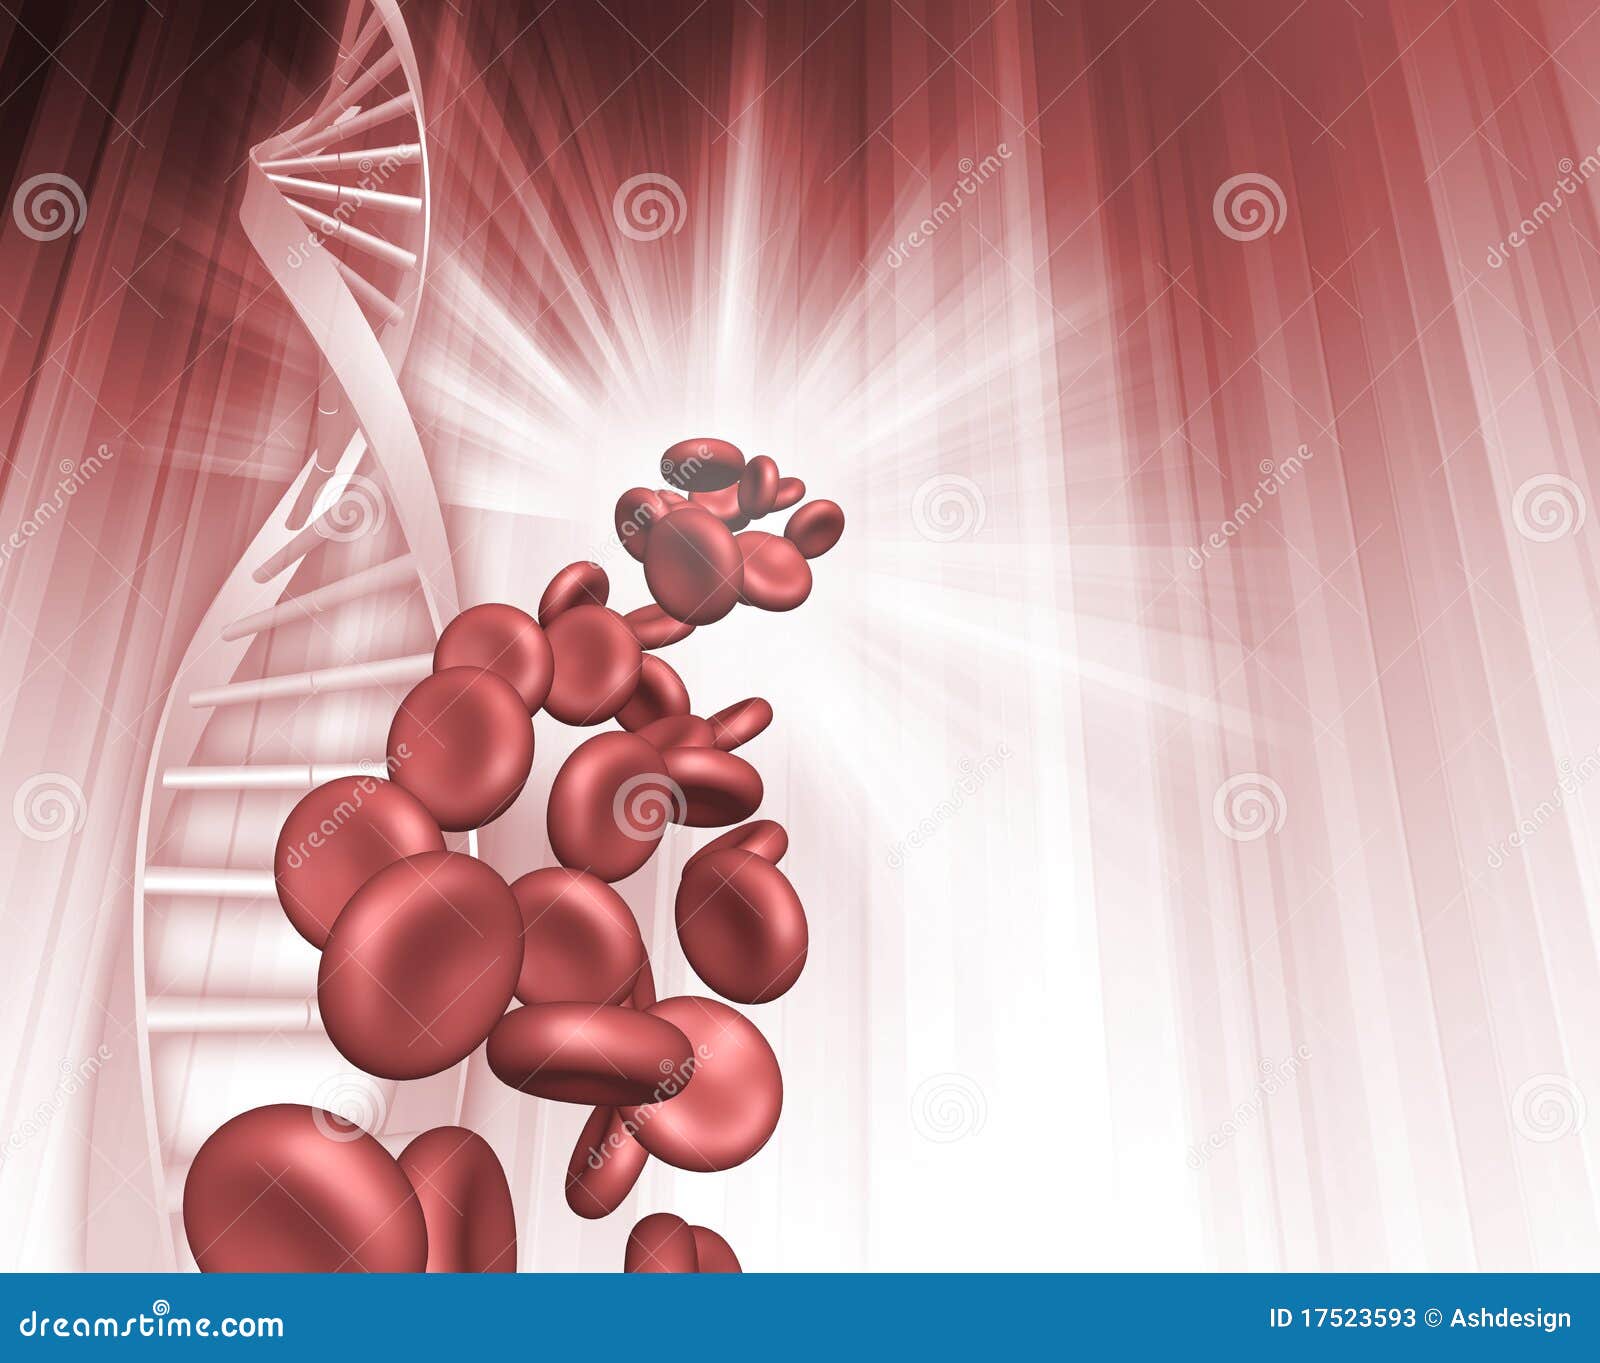 red blood cells falling dna helix